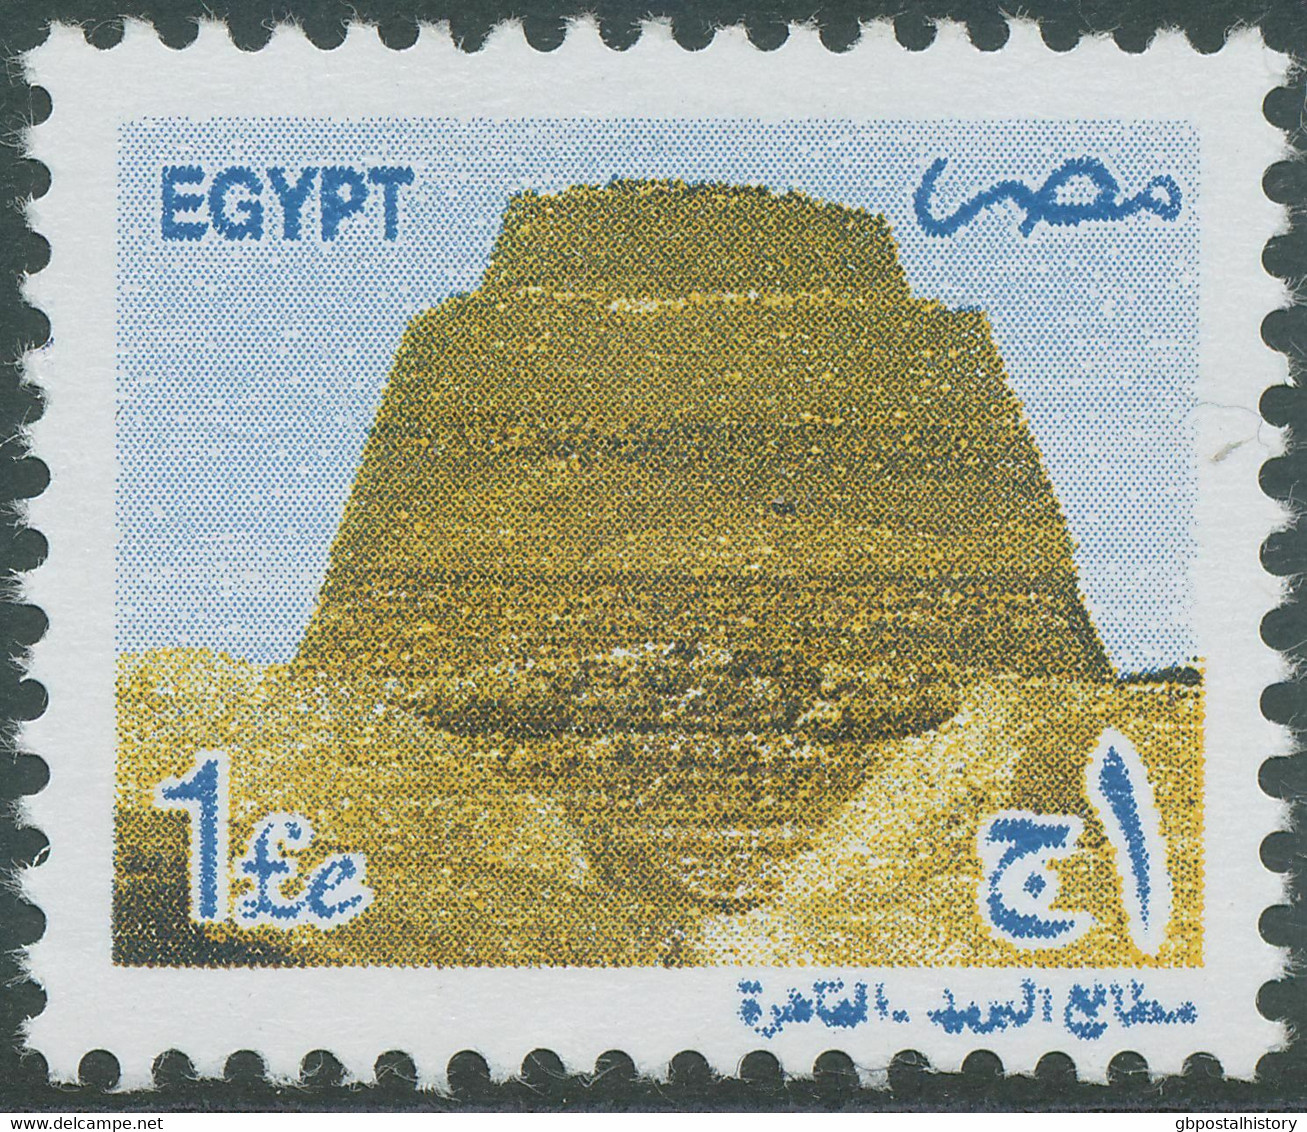 EGYPT 2002/5 Pyramid Of Snofru 1 Egyptian Pound, Two Superb U/M Stamps, VARIETY - Unused Stamps